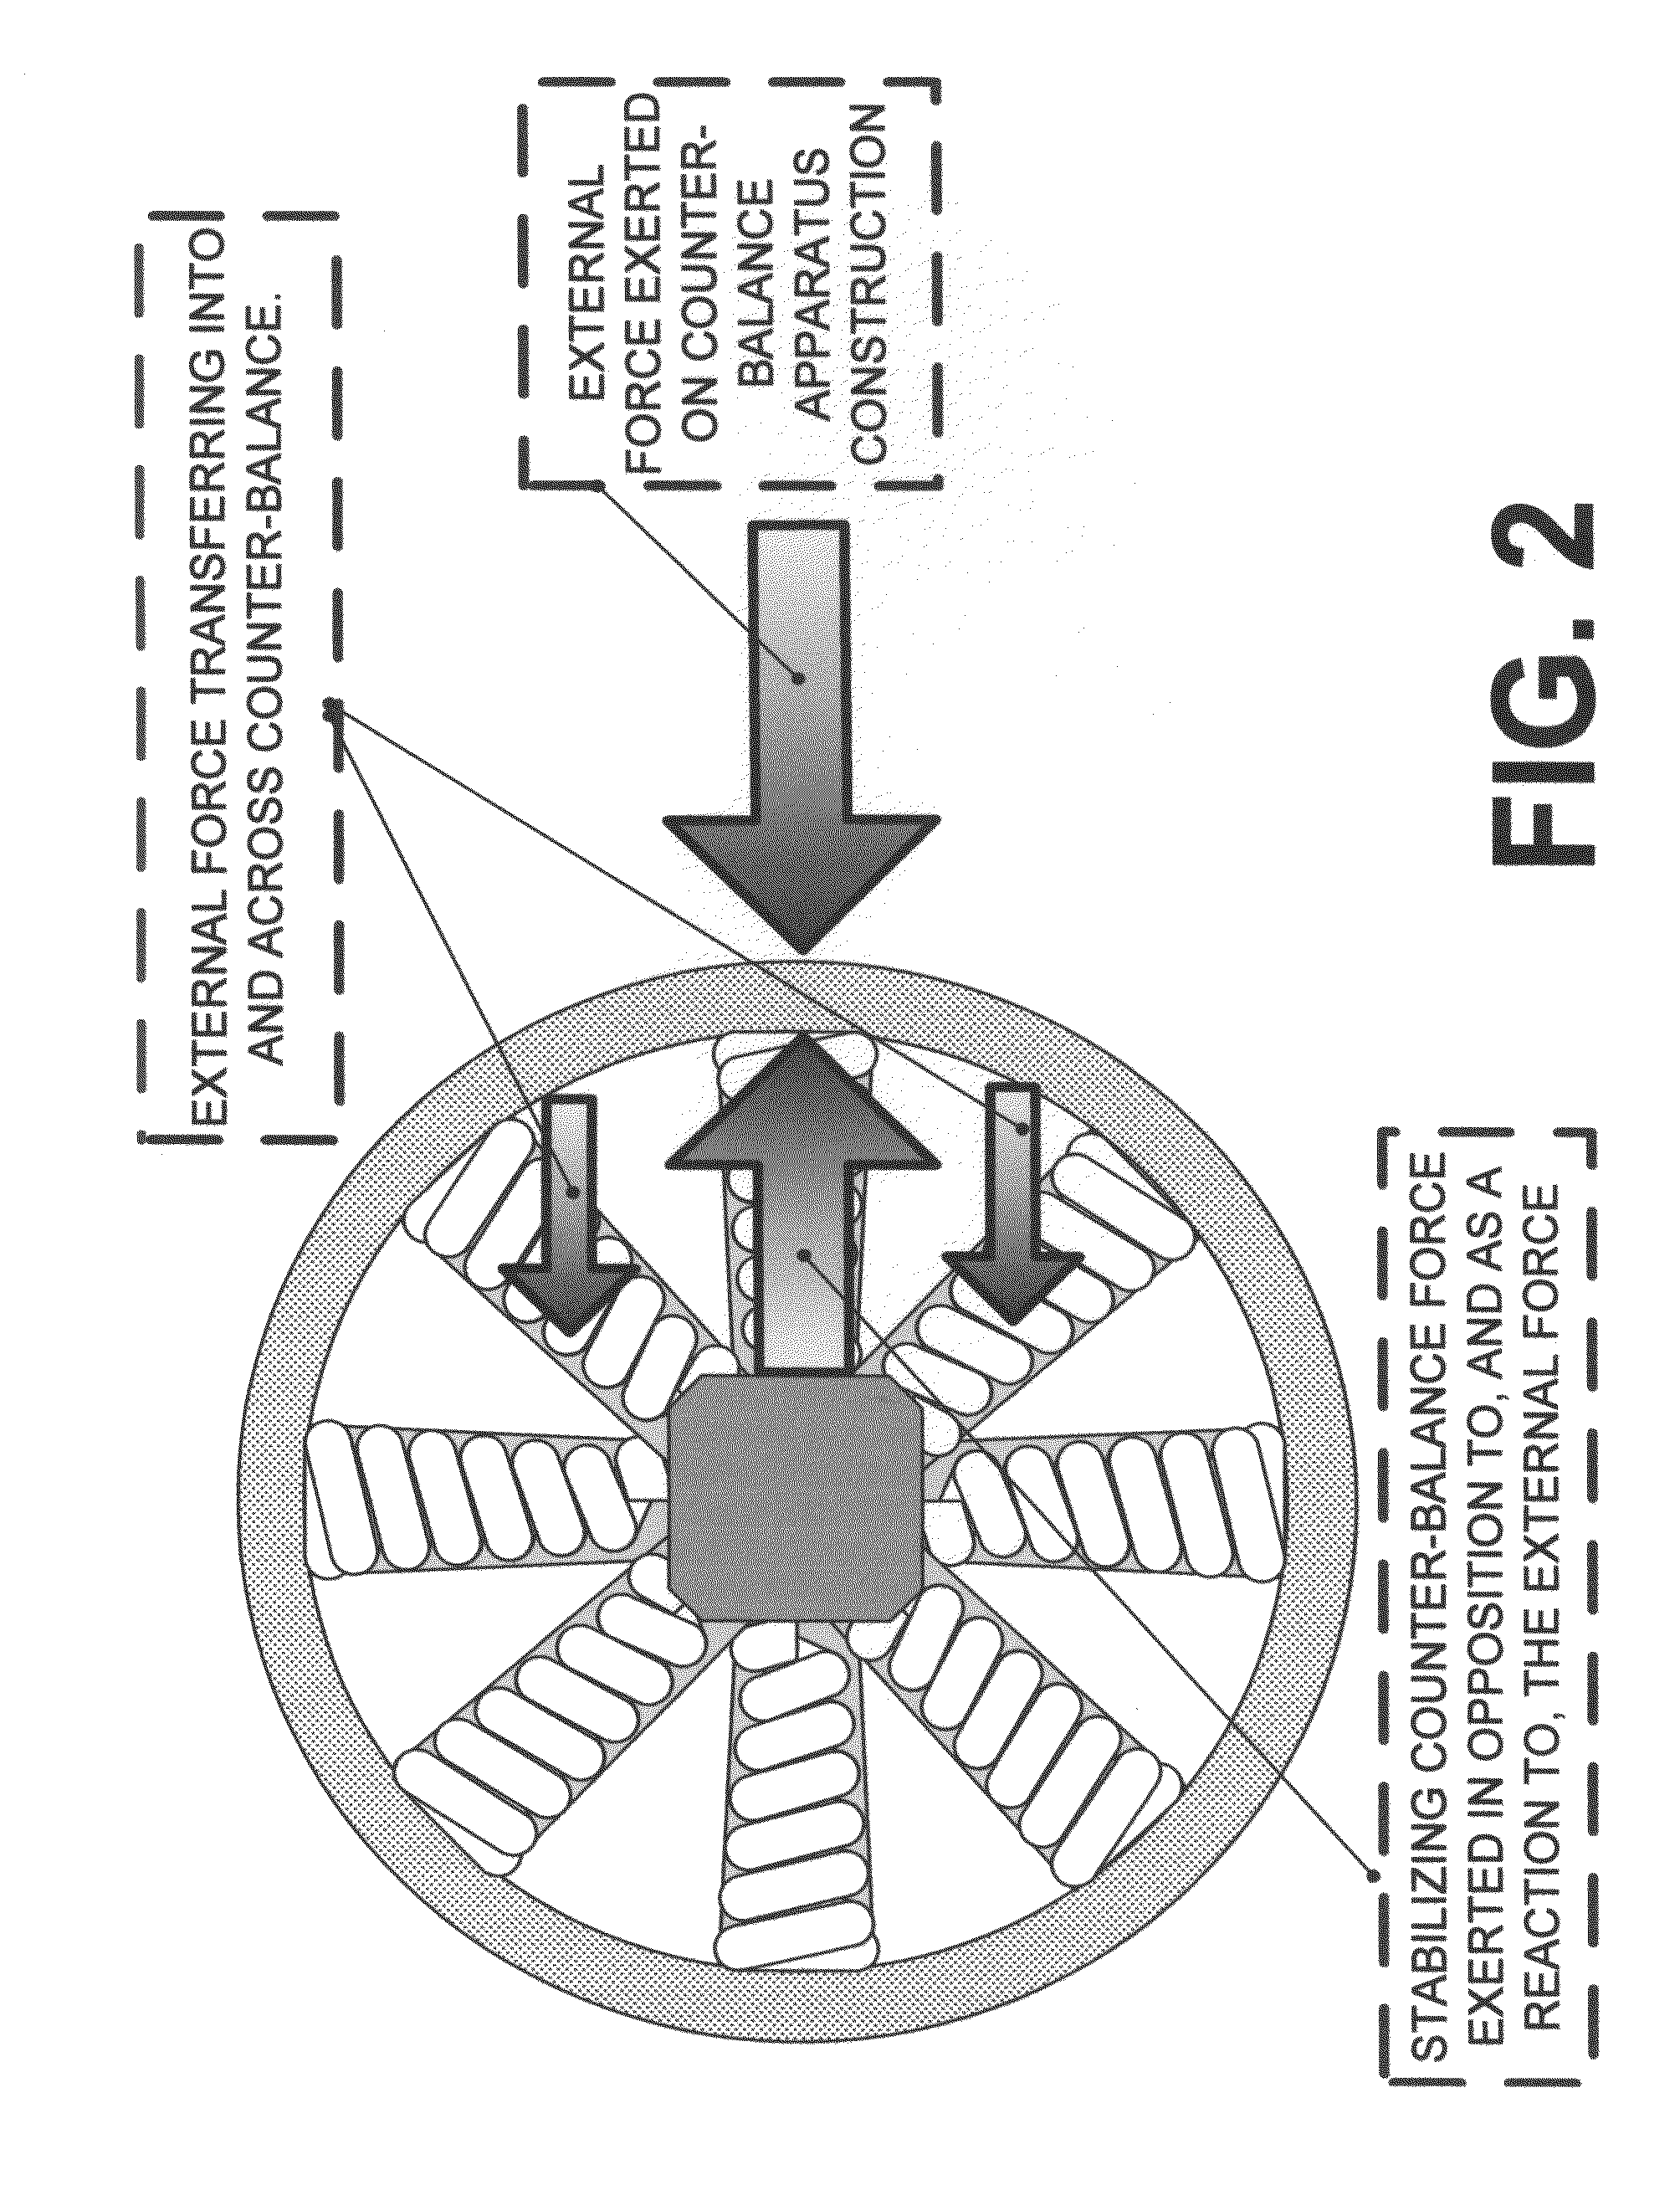 Counter-balance apparatus and method for providing a stabilizing force